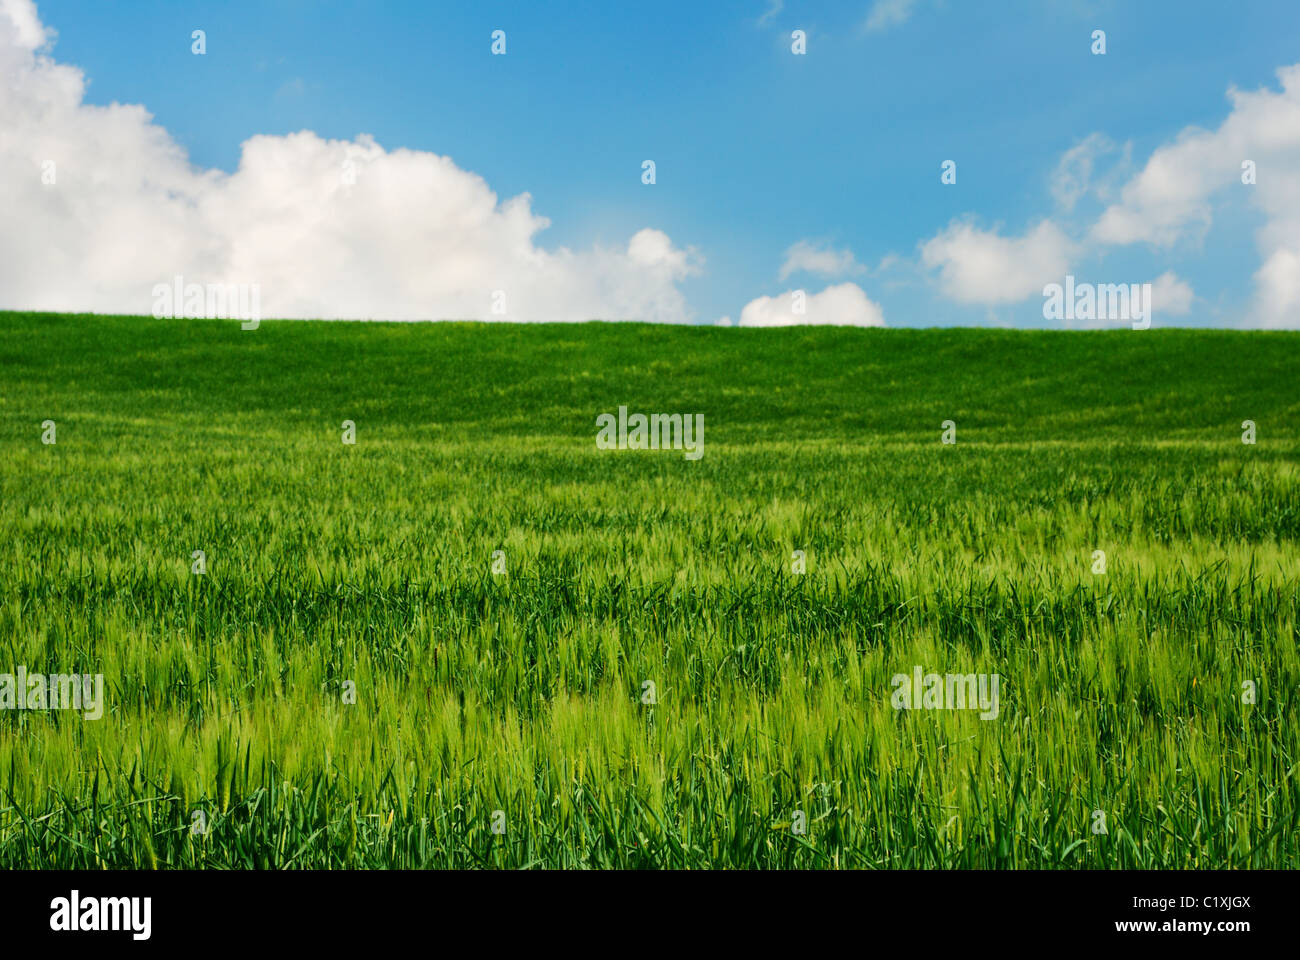 Bright green wheat field in late spring with blue and white sky Stock Photo